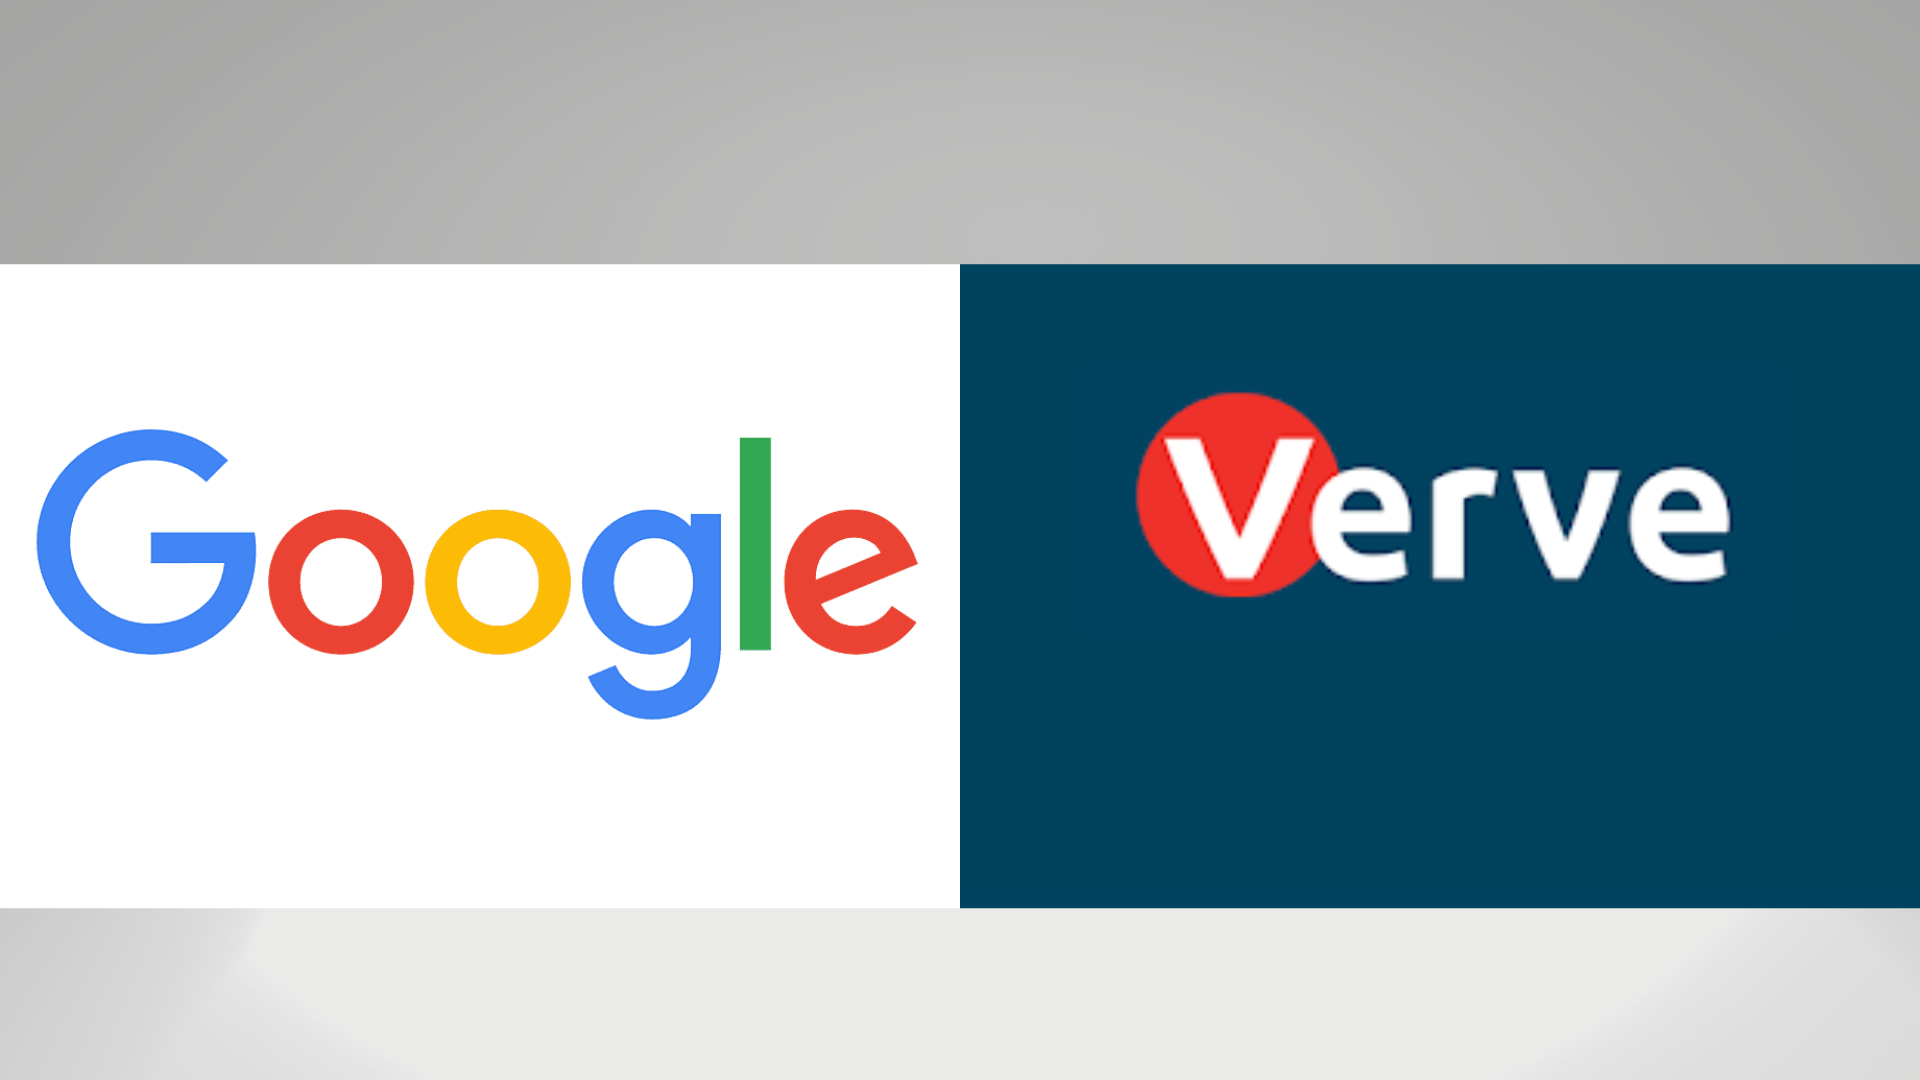 Google, Verve Partner To Enable Payments On Google Play Store For Nigerians